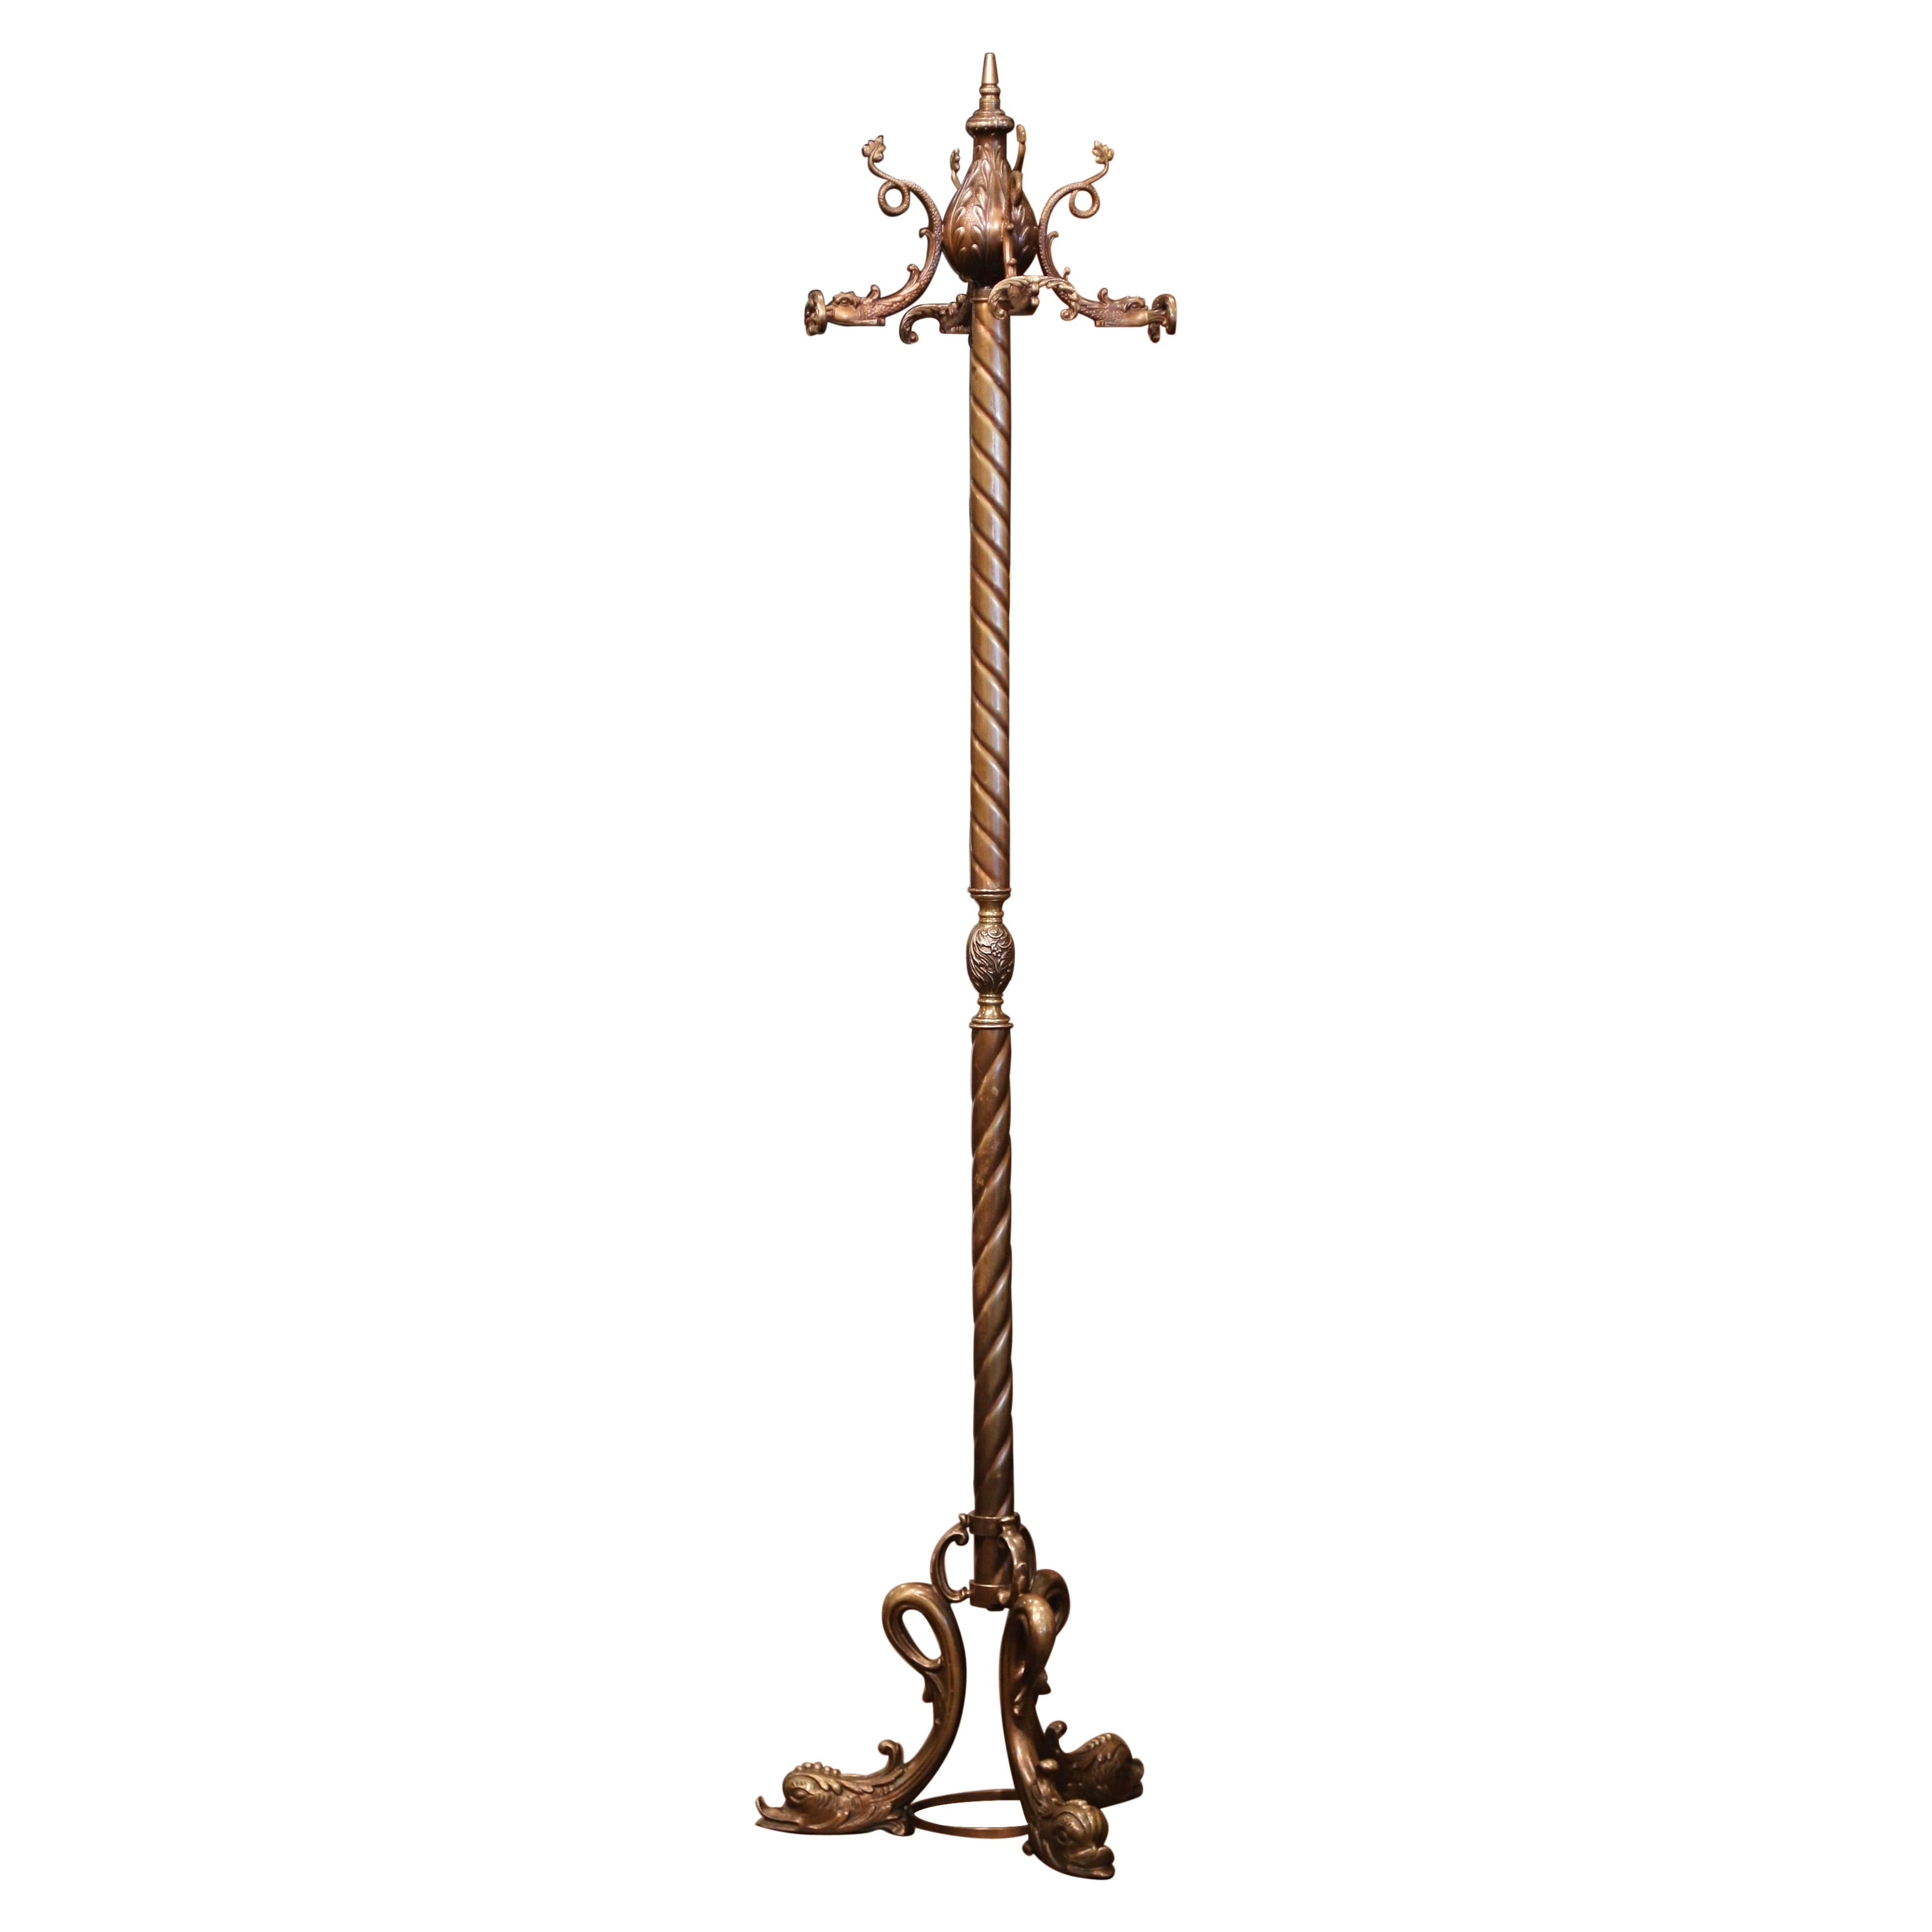 Early 20th Century French Gilt Brass Swivel Dolphin Standing Hall Tree